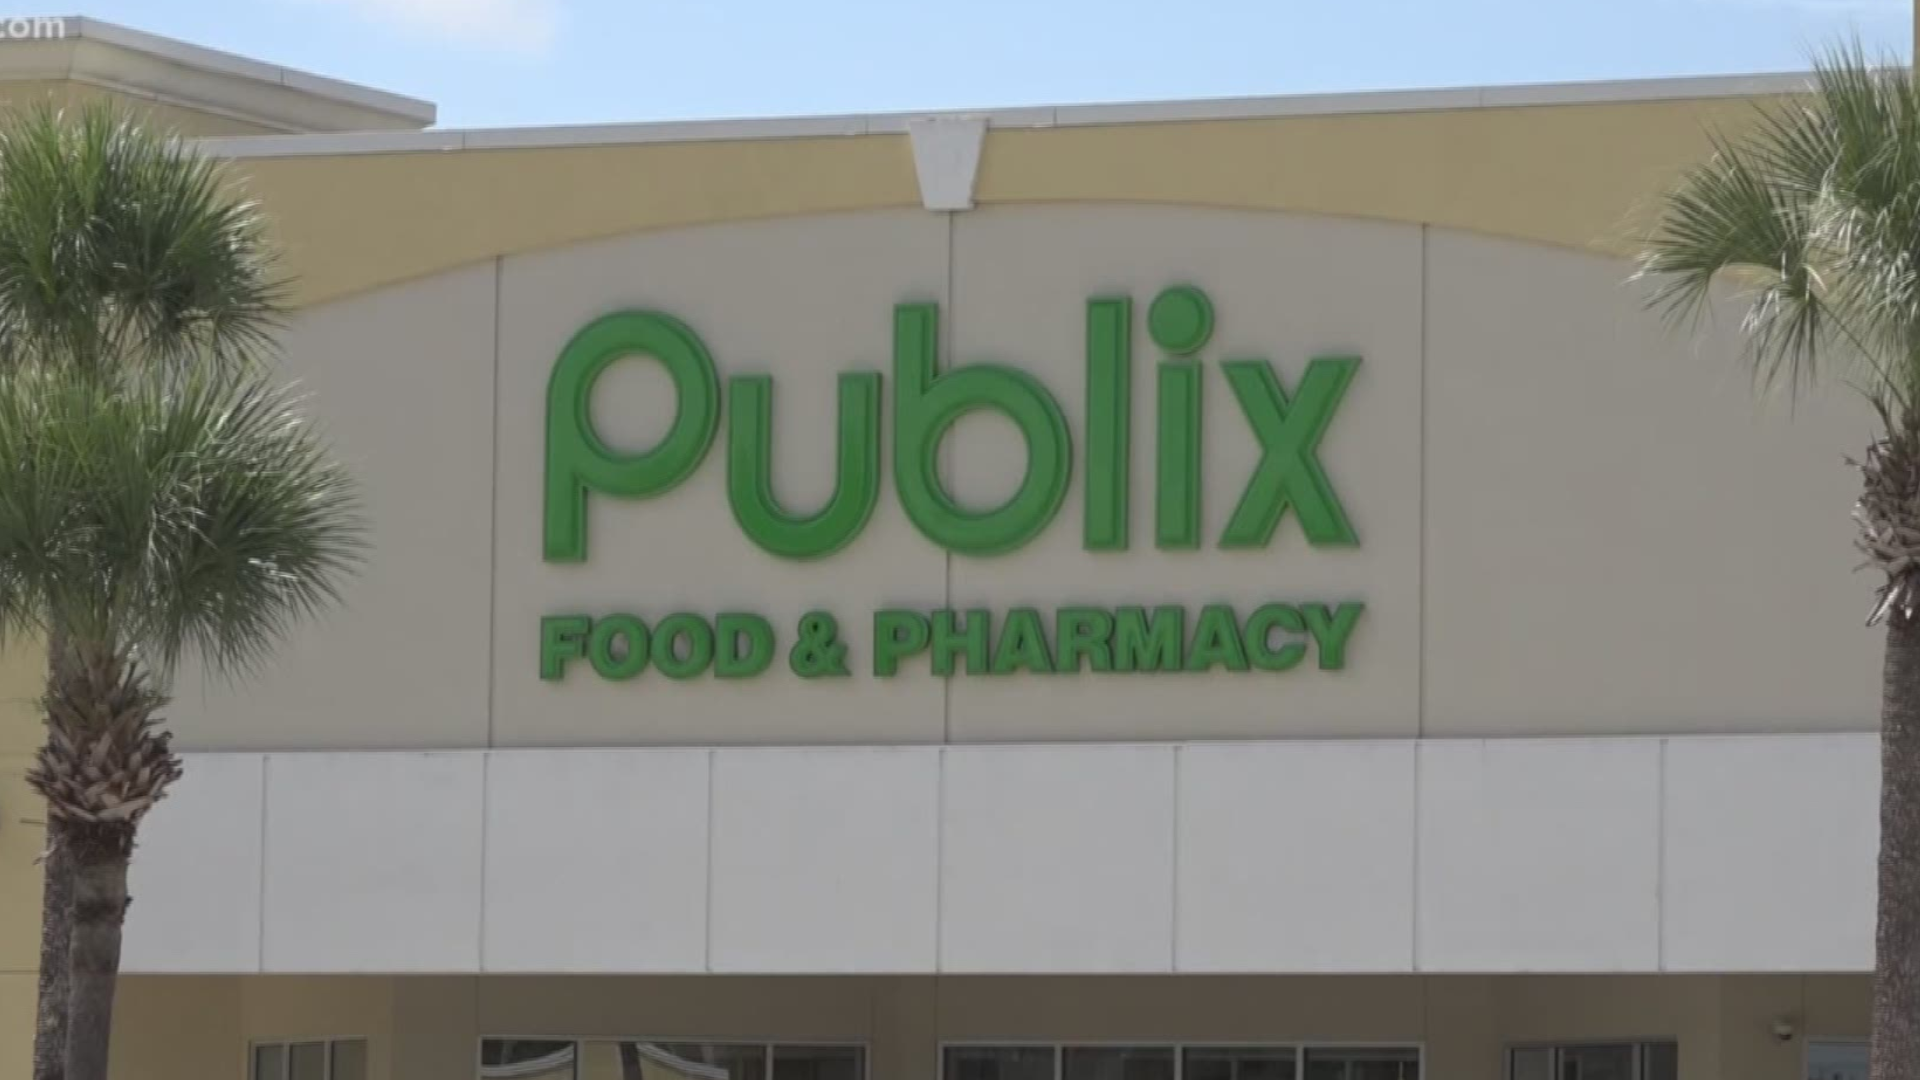 A development company recently closed on property in Hollywood, which could include a three-story building with a Publix, a garage and a dock. https://on.wtsp.com/2m